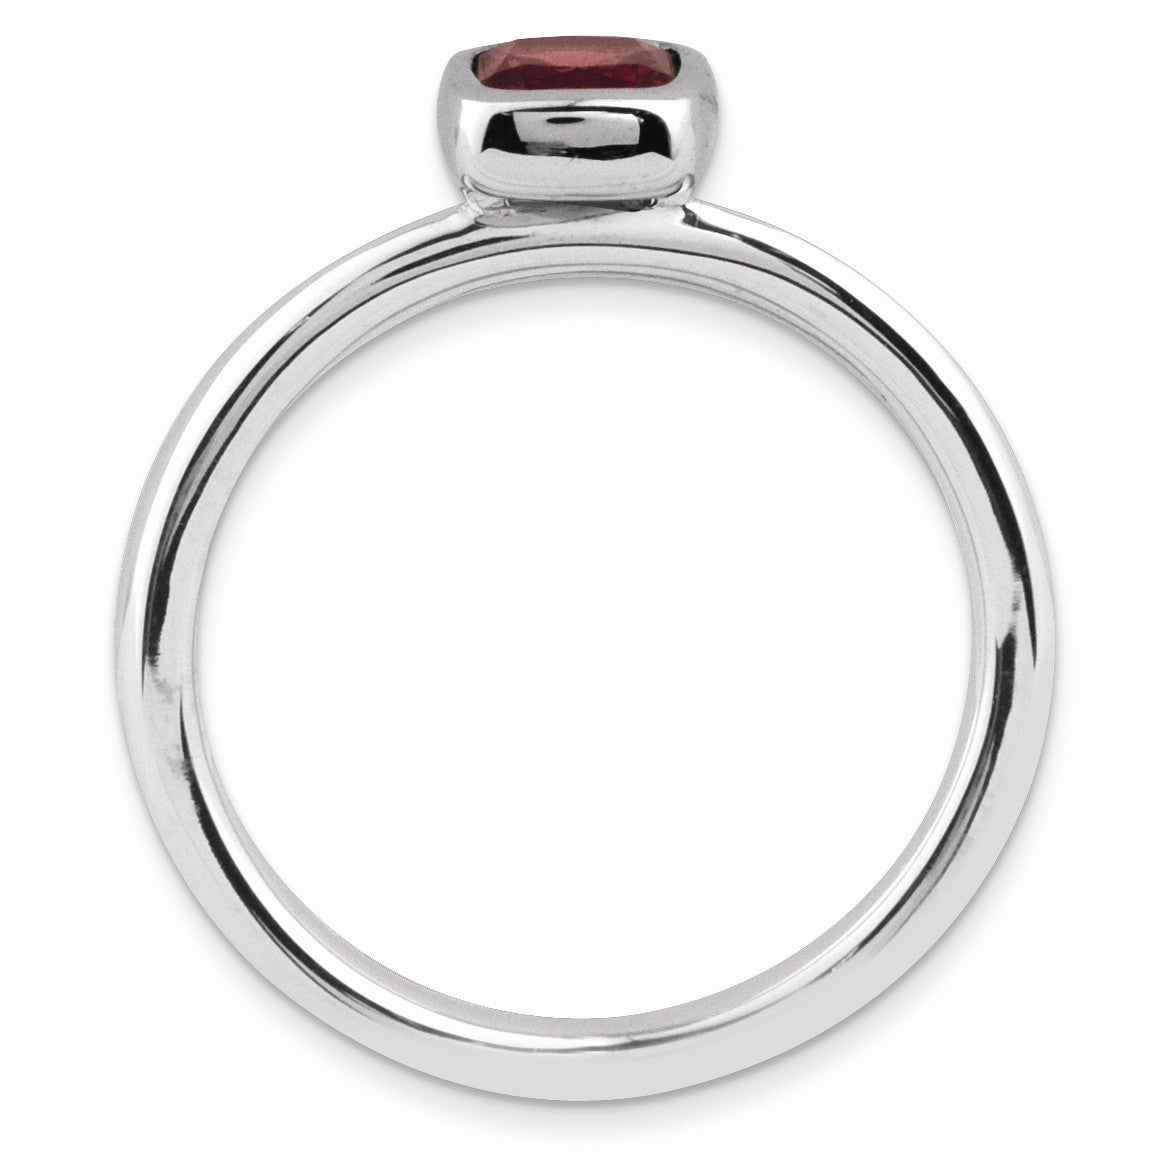 Alternate view of the Sterling Silver Stackable Cushion Cut Garnet Solitaire Ring by The Black Bow Jewelry Co.